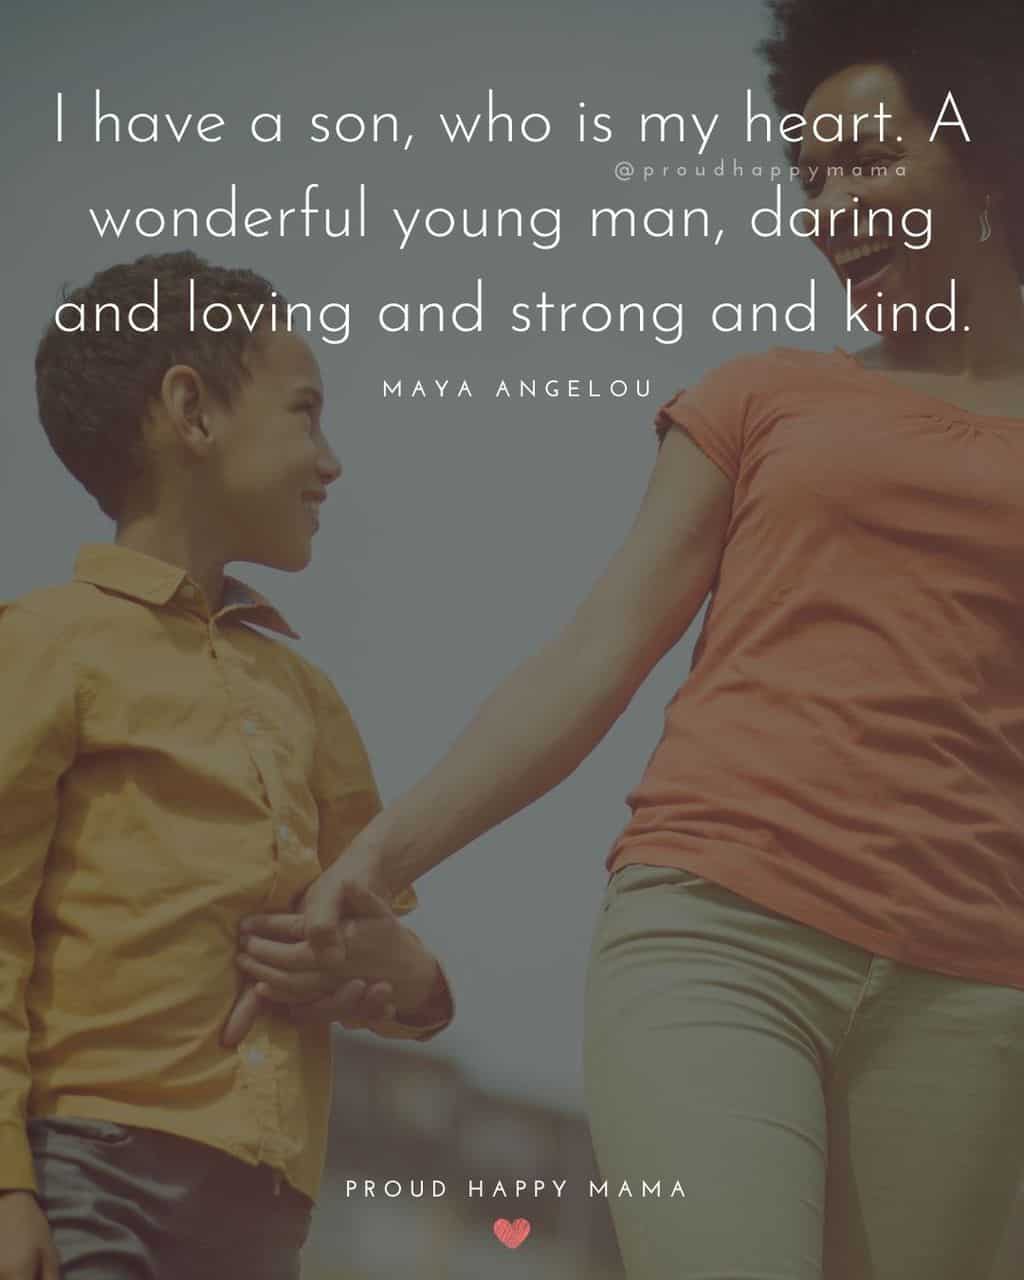 Son Quotes - I have a son, who is my heart. A wonderful young man, daring and loving and strong and kind.’ – Maya Angelou